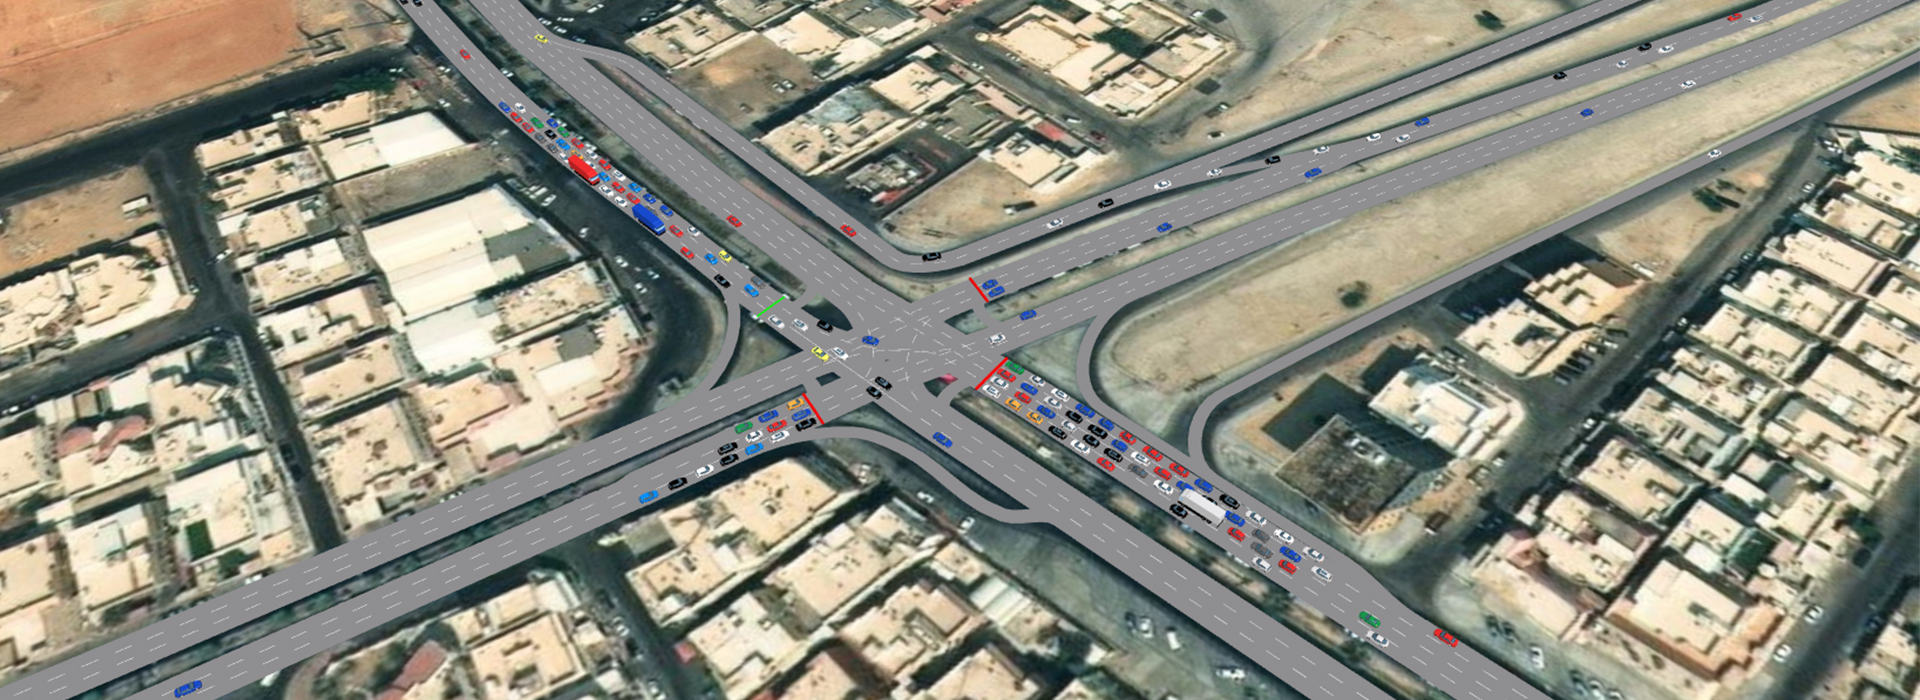 DESIGN AND OPERATIONAL PLAN FOR AL-UQAIR TOURIST ROAD IN AL AHSA - 2